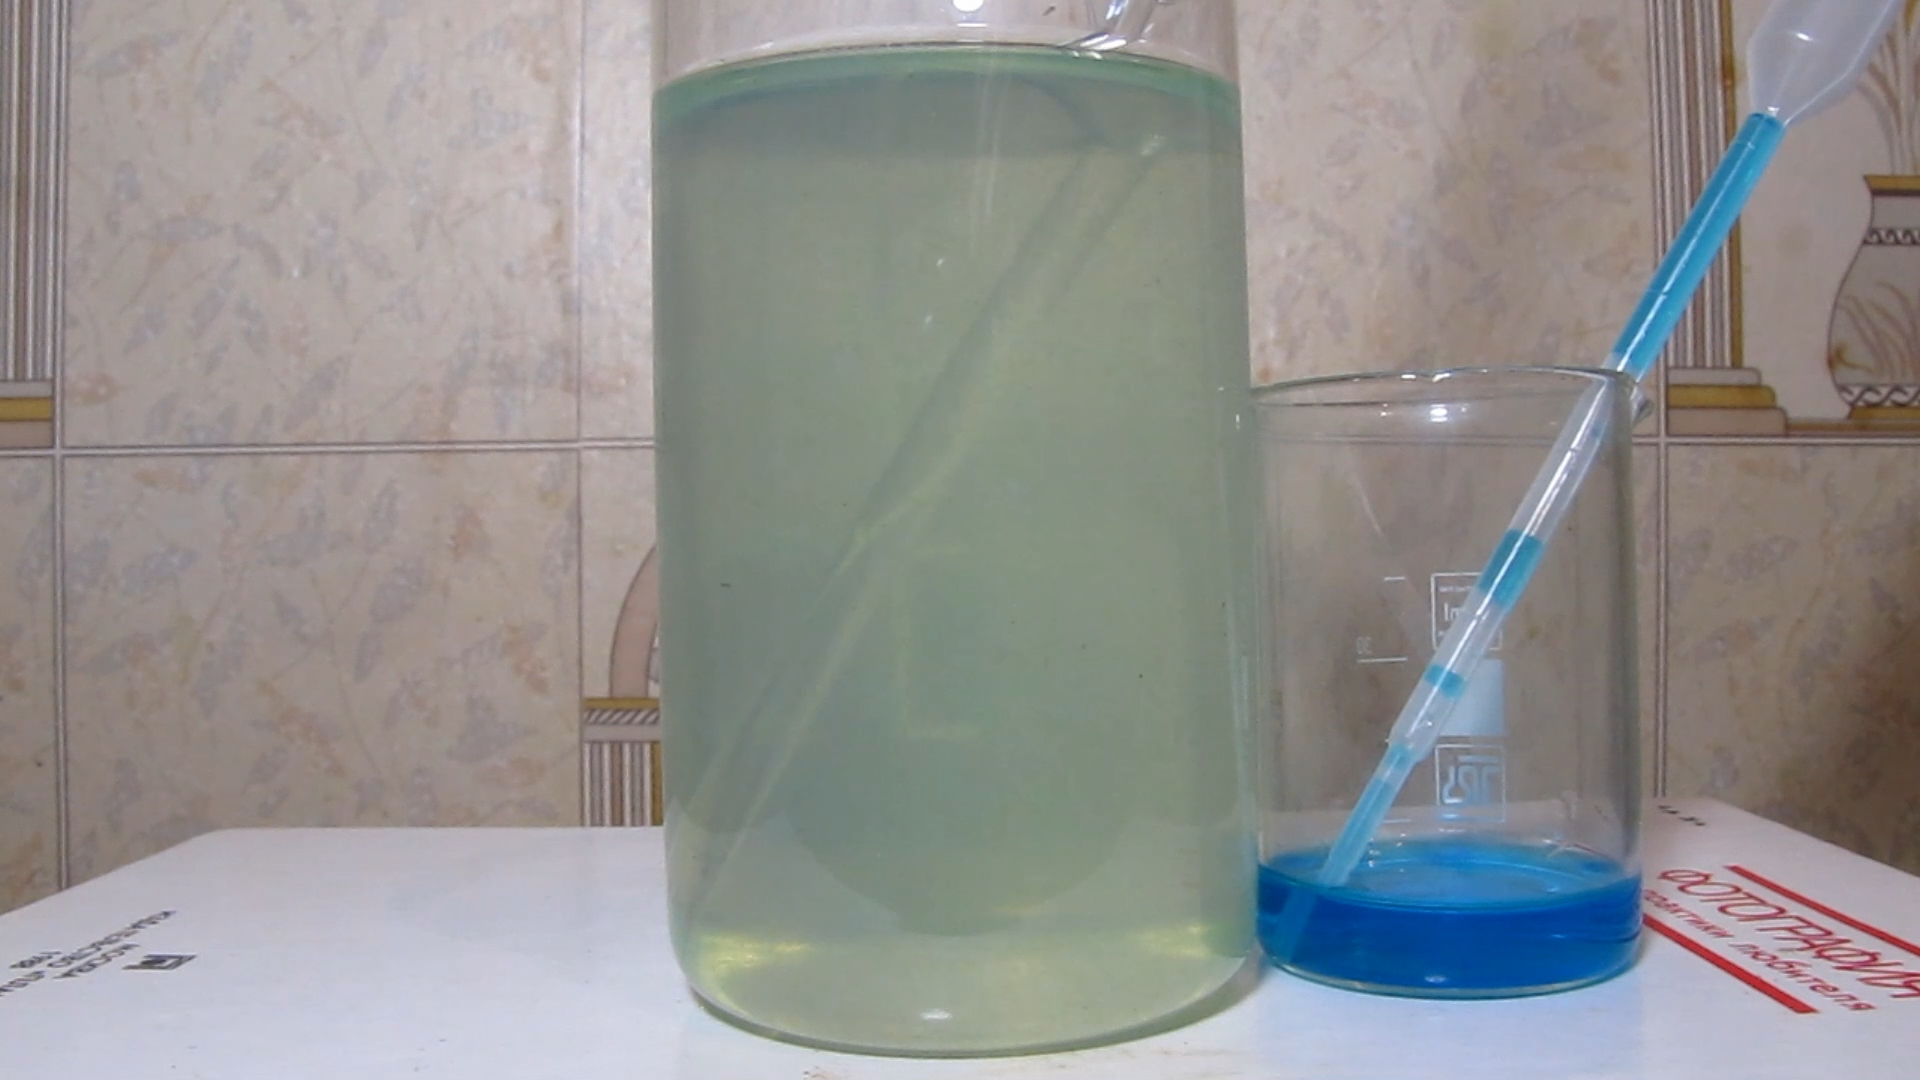 Lake water and copper sulfate